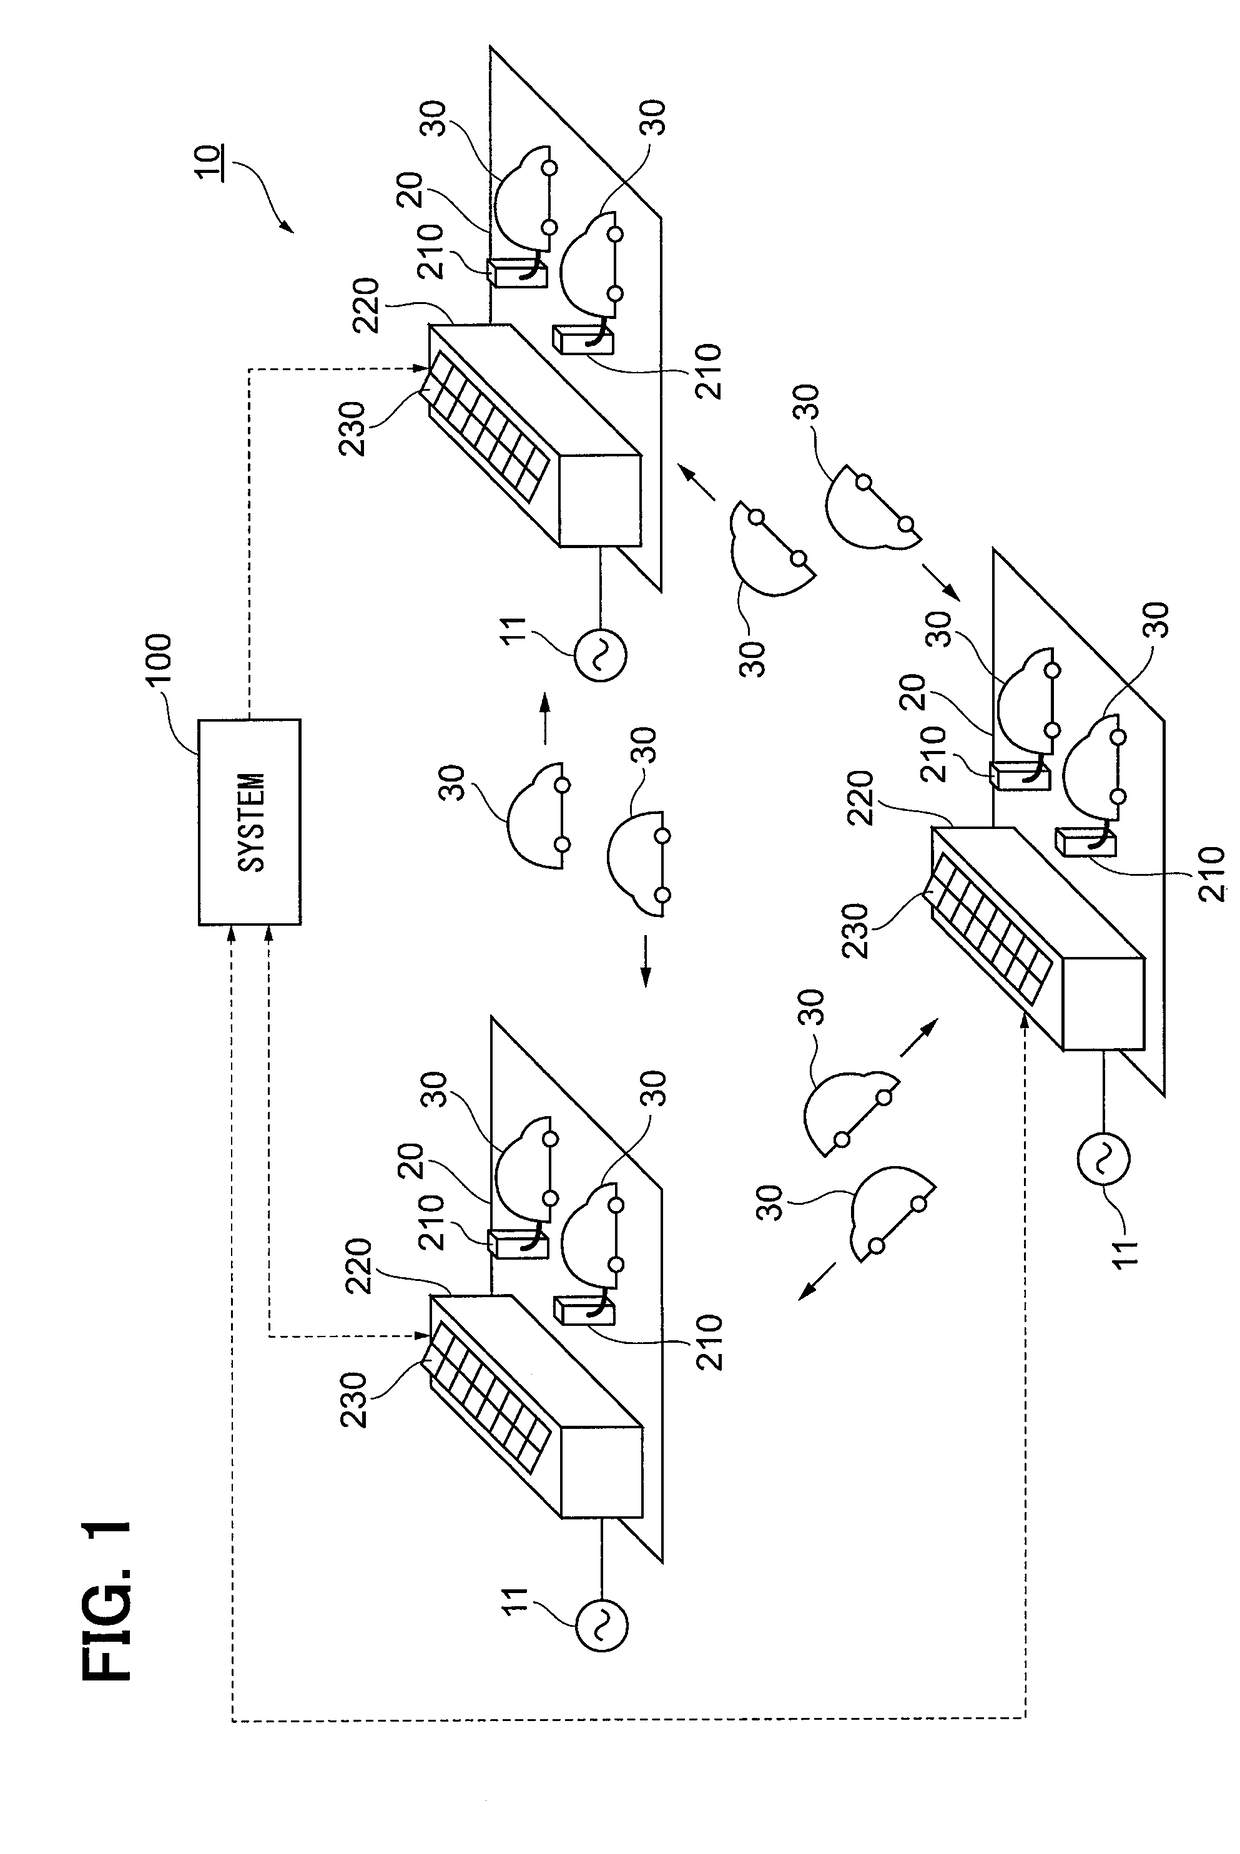 Vehicle management system for vehicle-sharing service